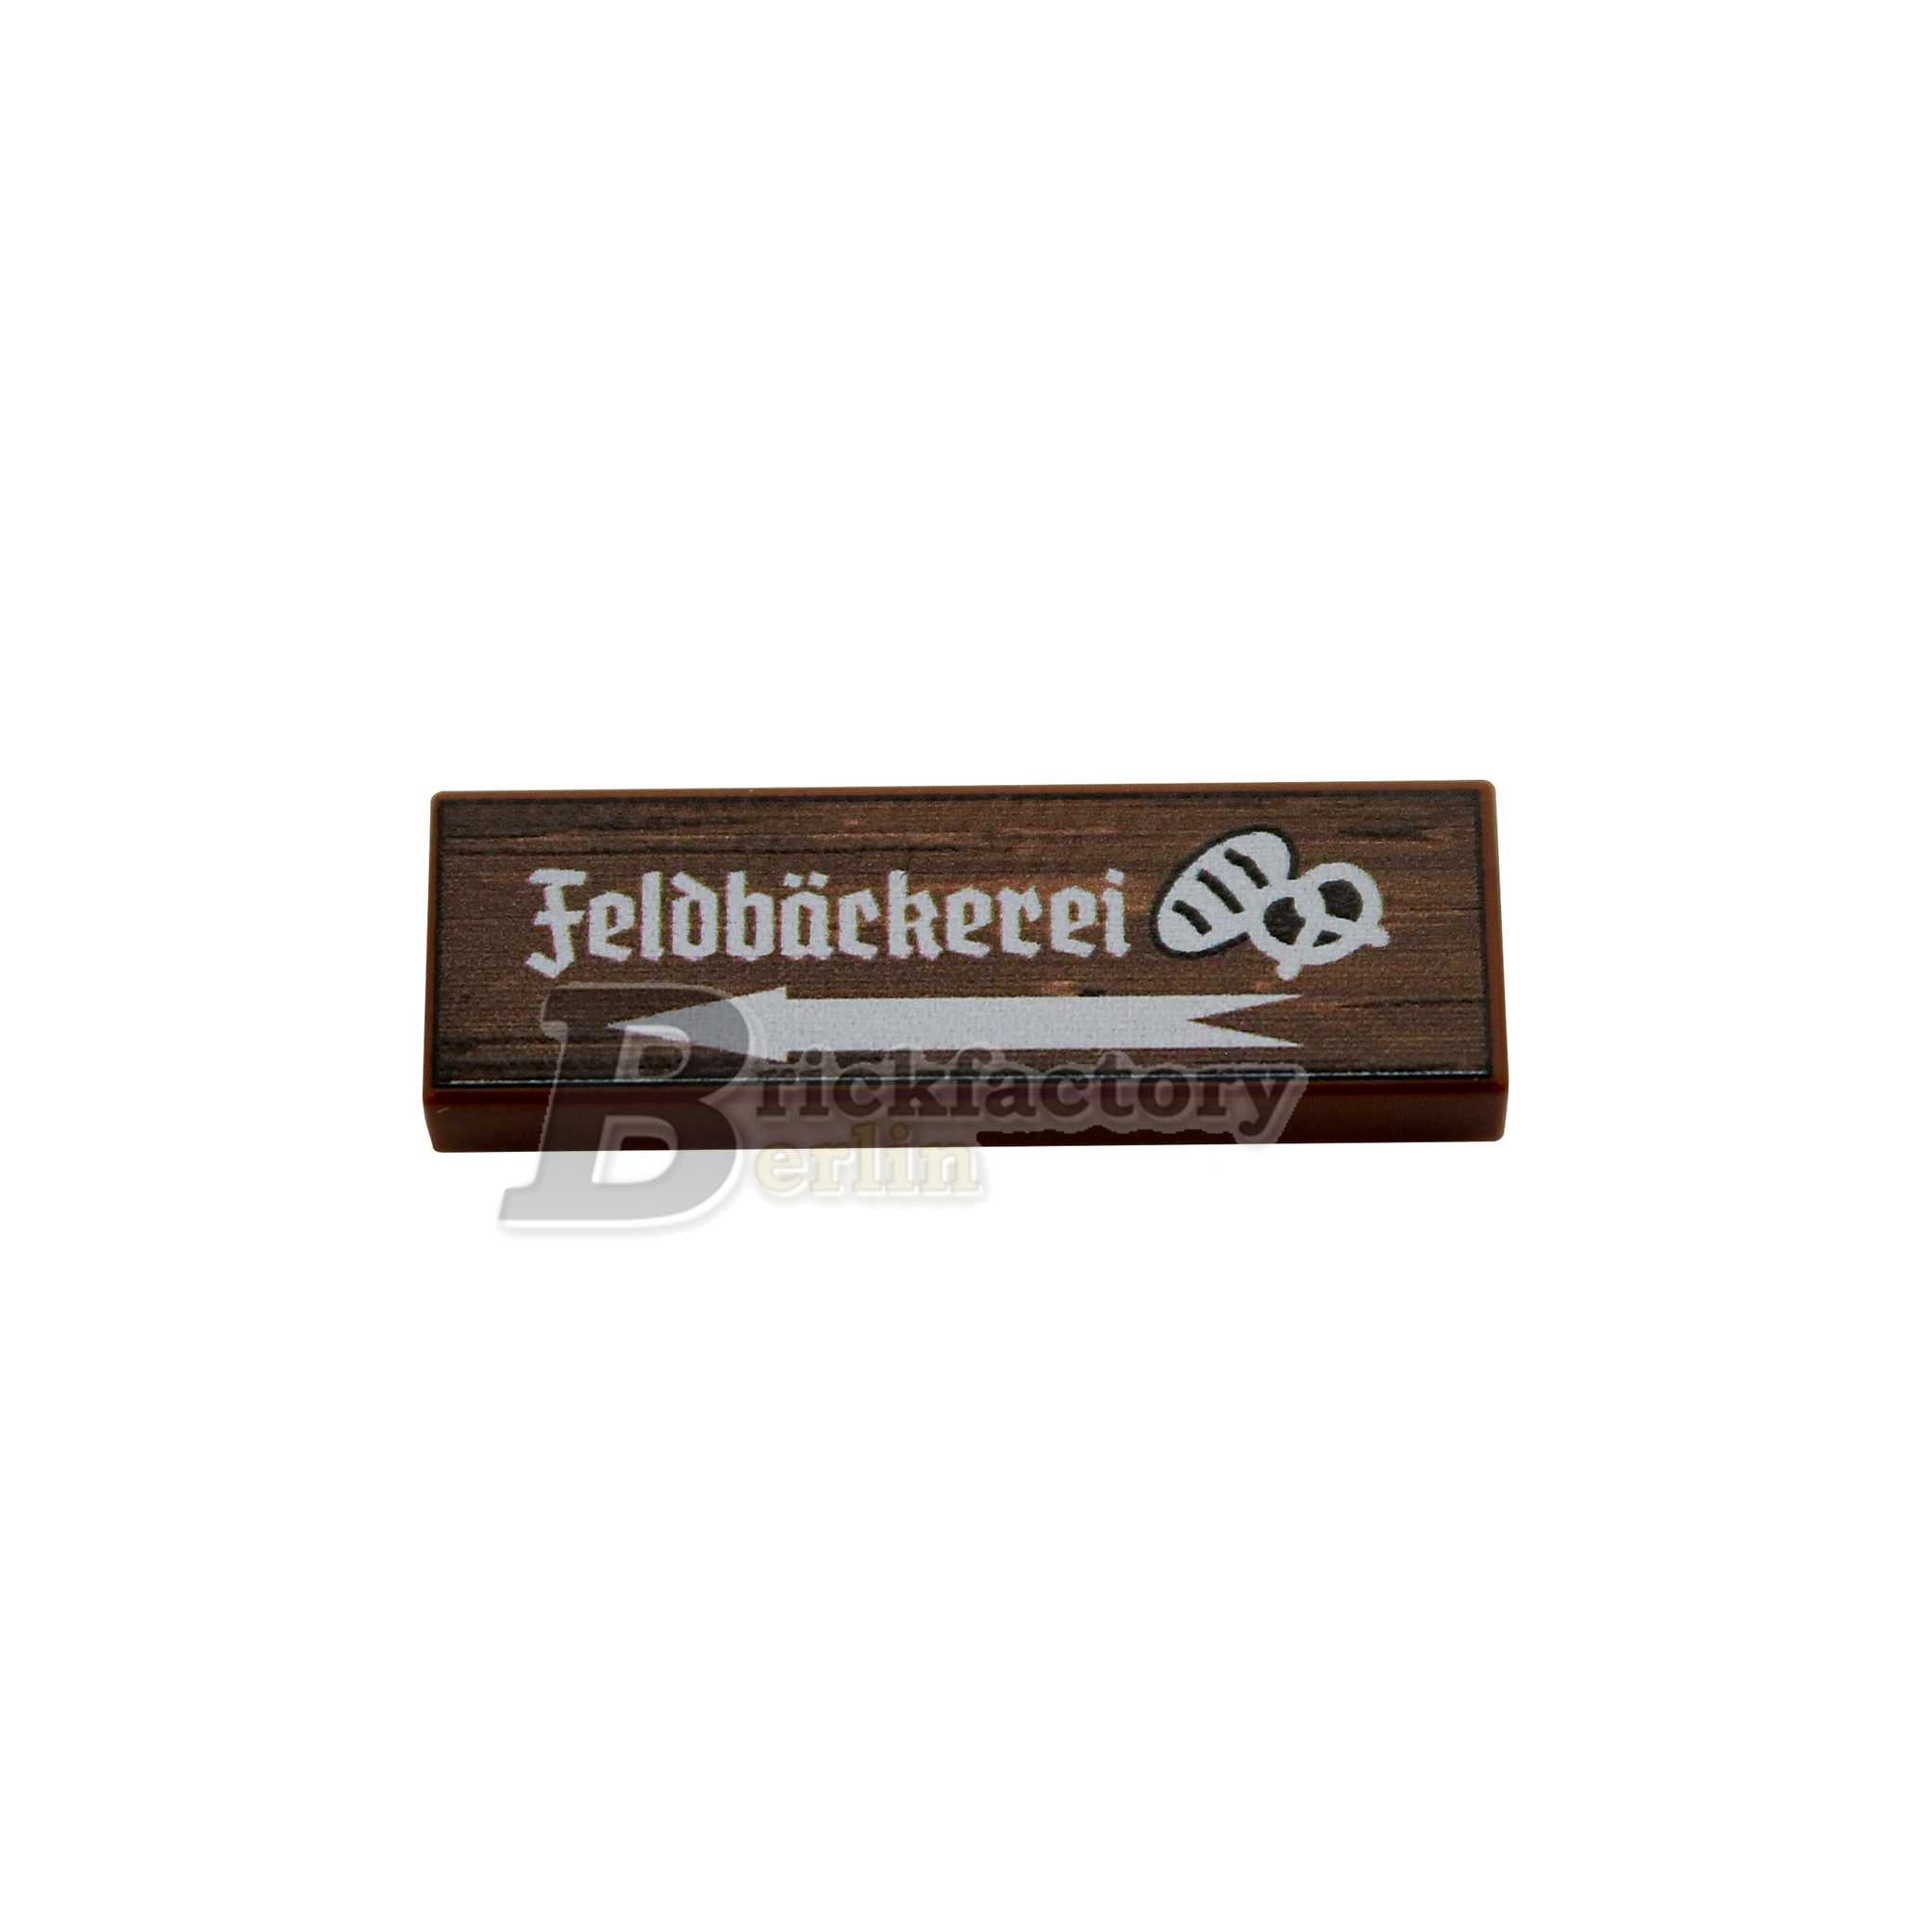 BF-0472D - Field Bakery (Color: Reddish-Brown, Printed LEGO® Tile 1x3)